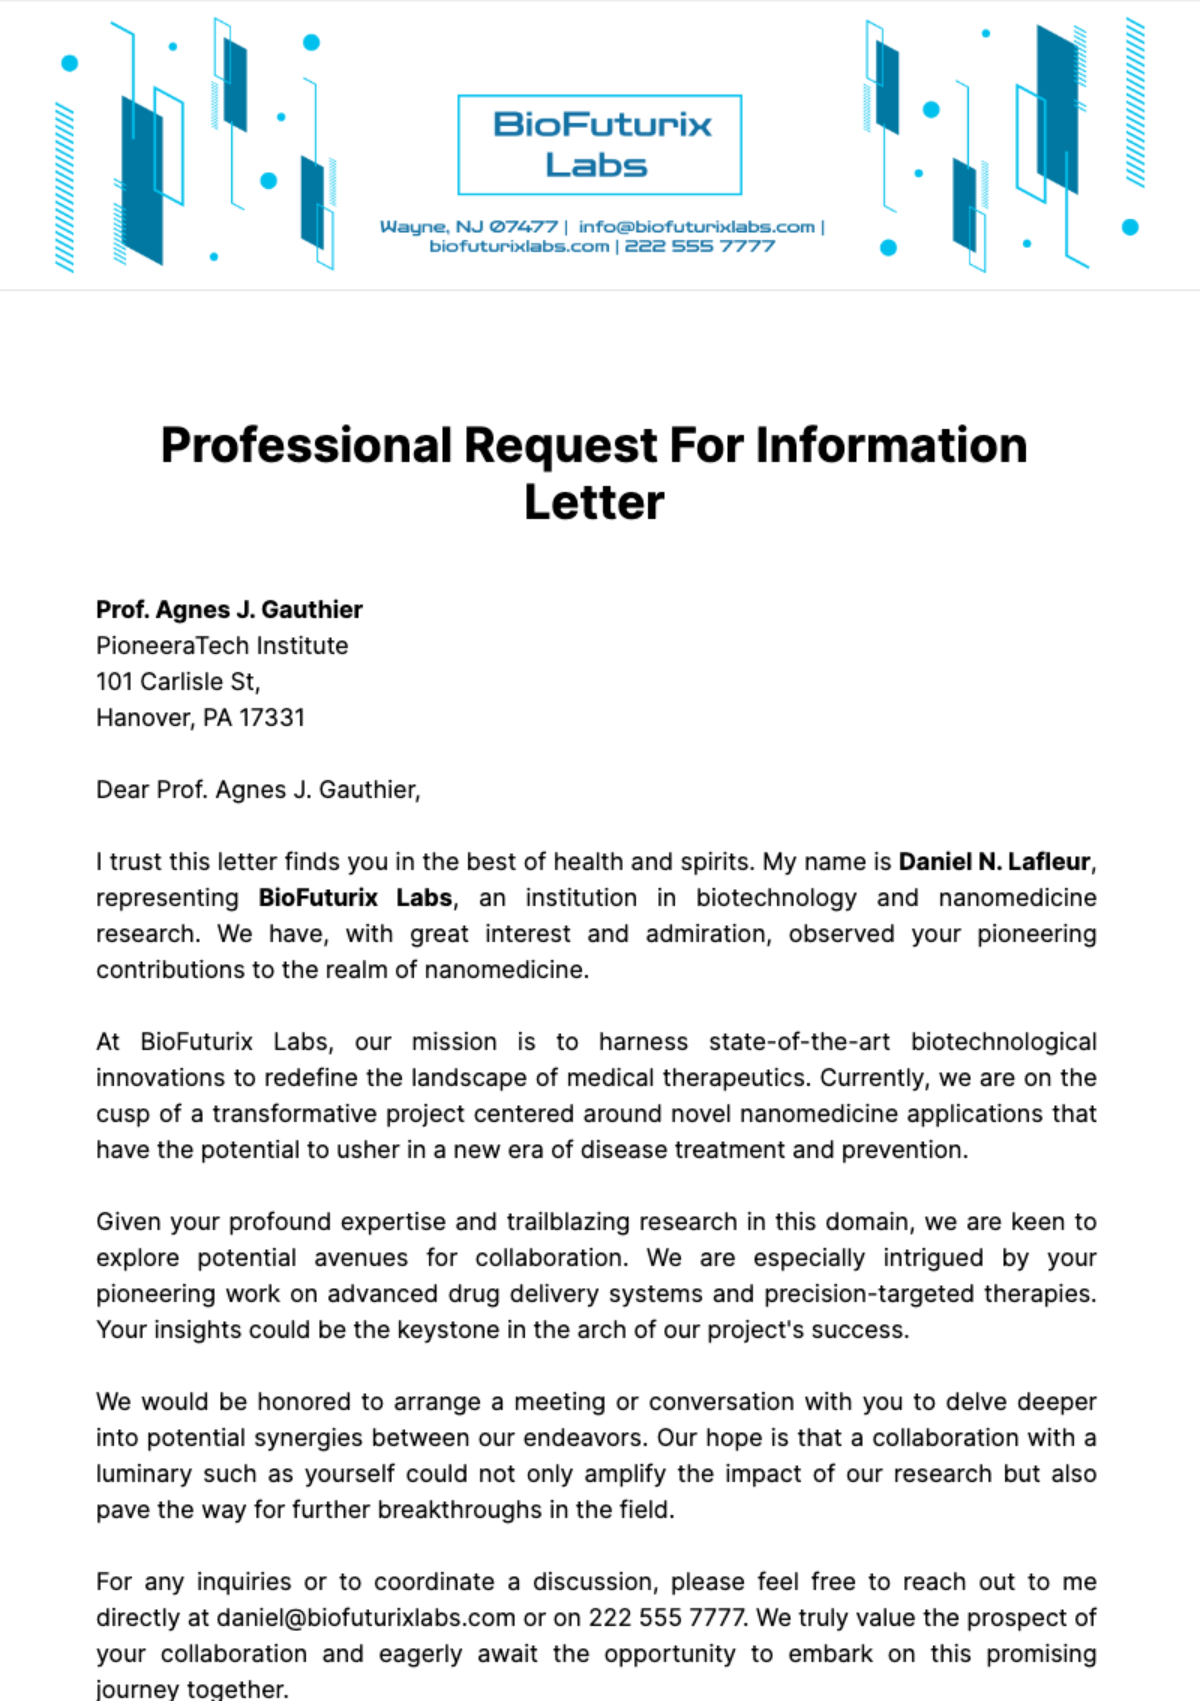 Professional Request For Information Letter Template